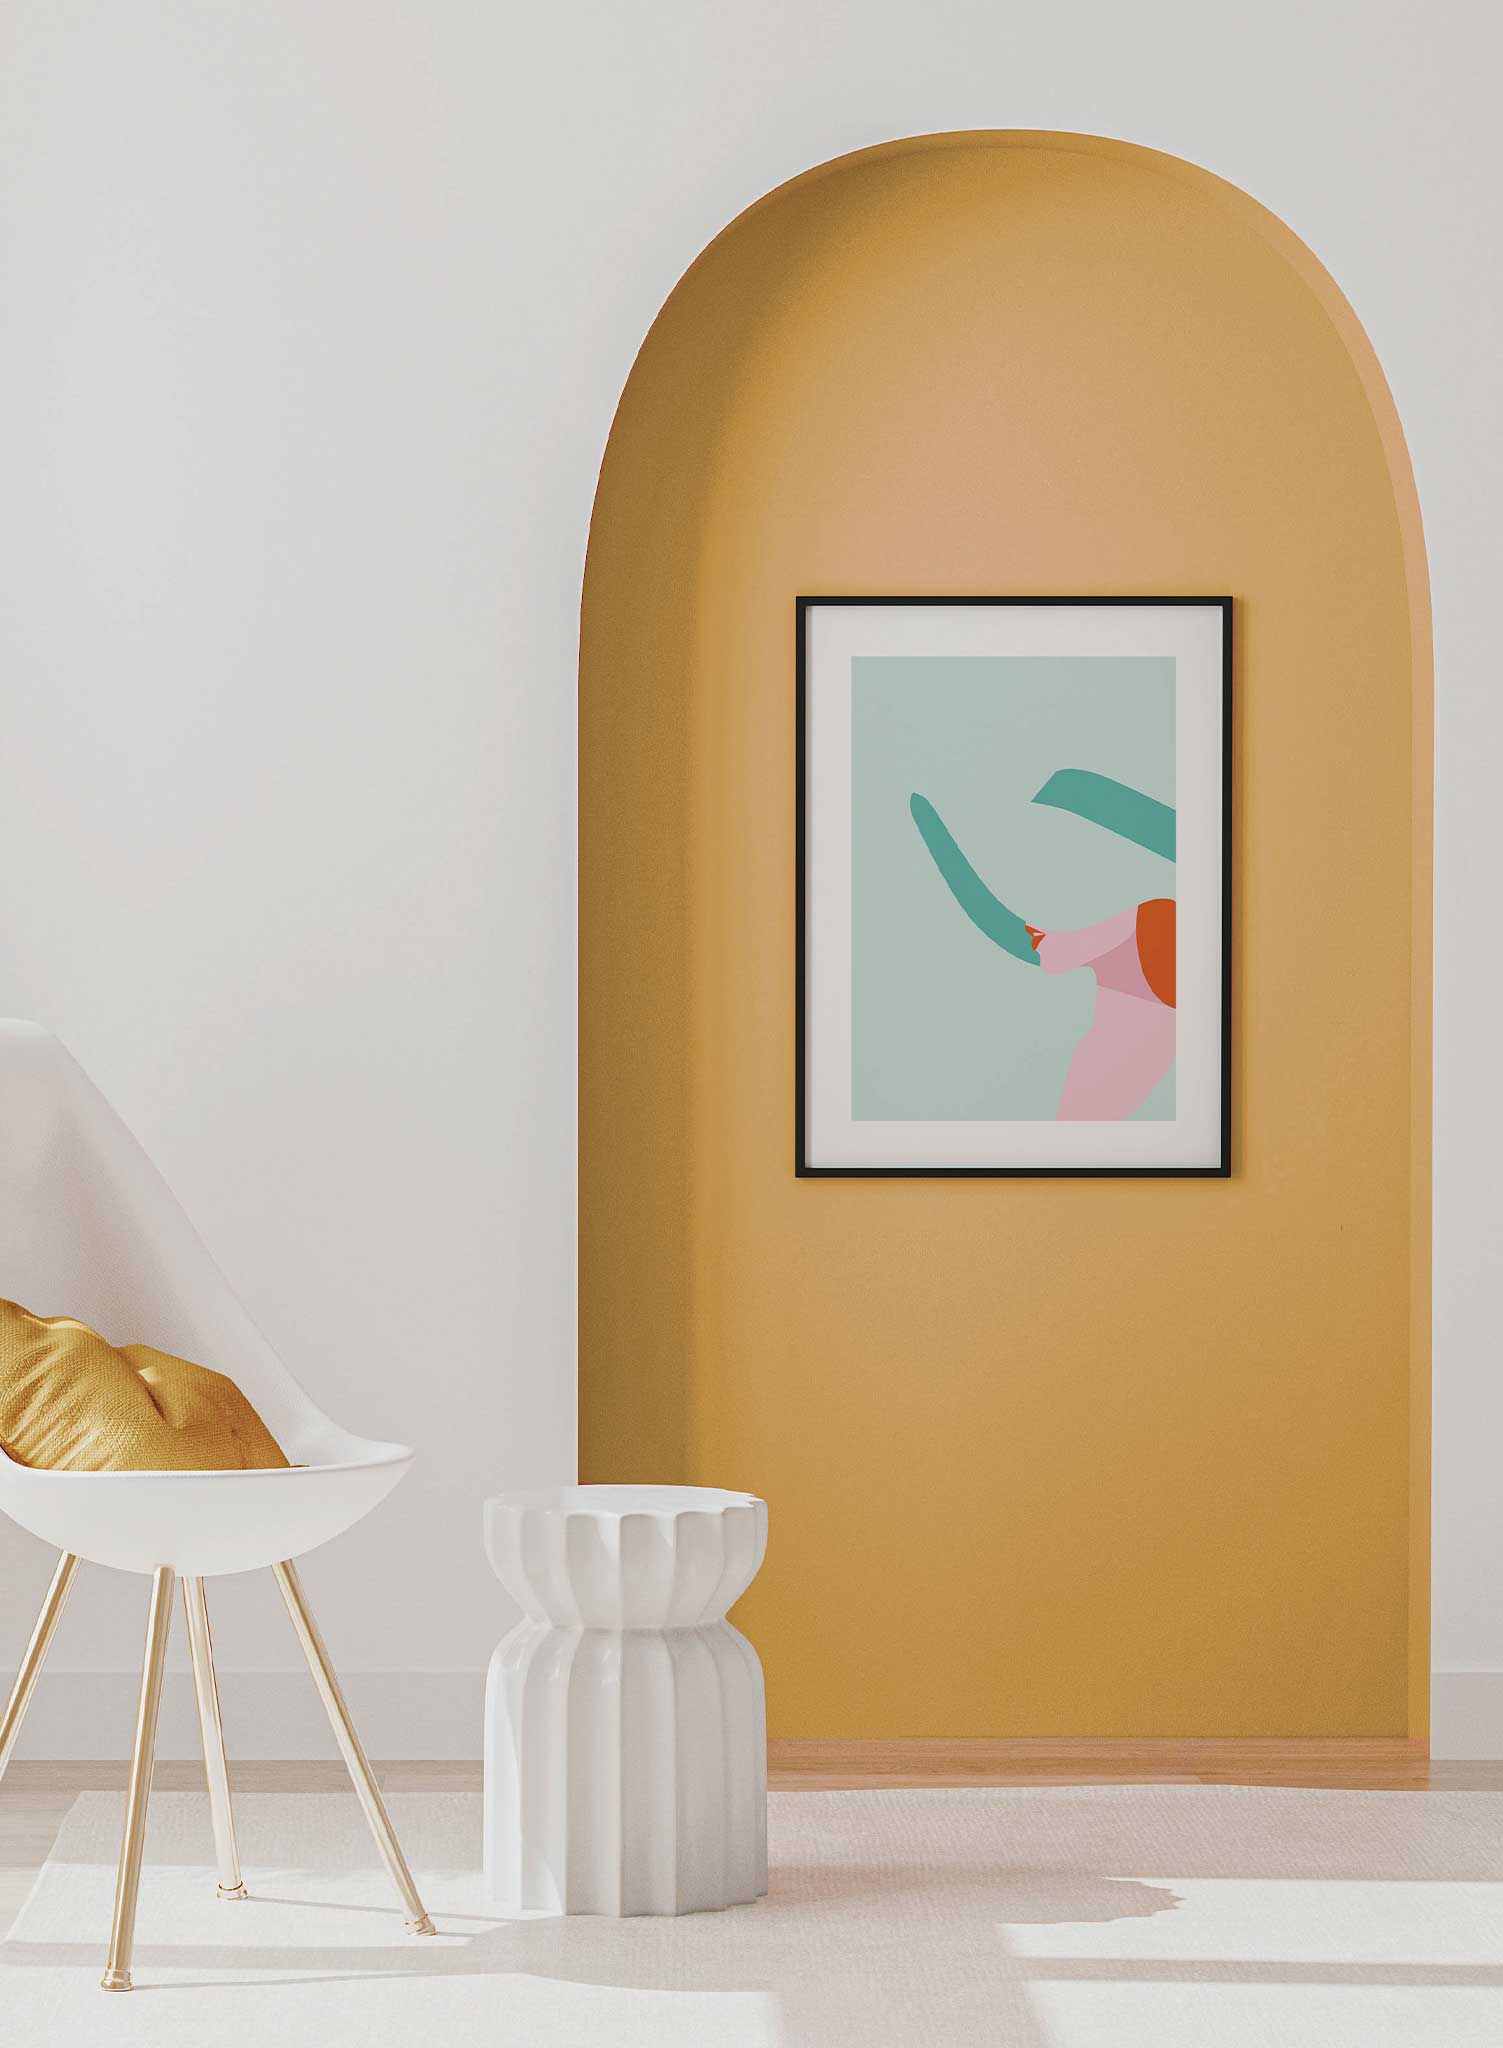 Shady Lady is a minimalist illustration poster of a glamorous woman with a large sunhat by Opposite Wall.